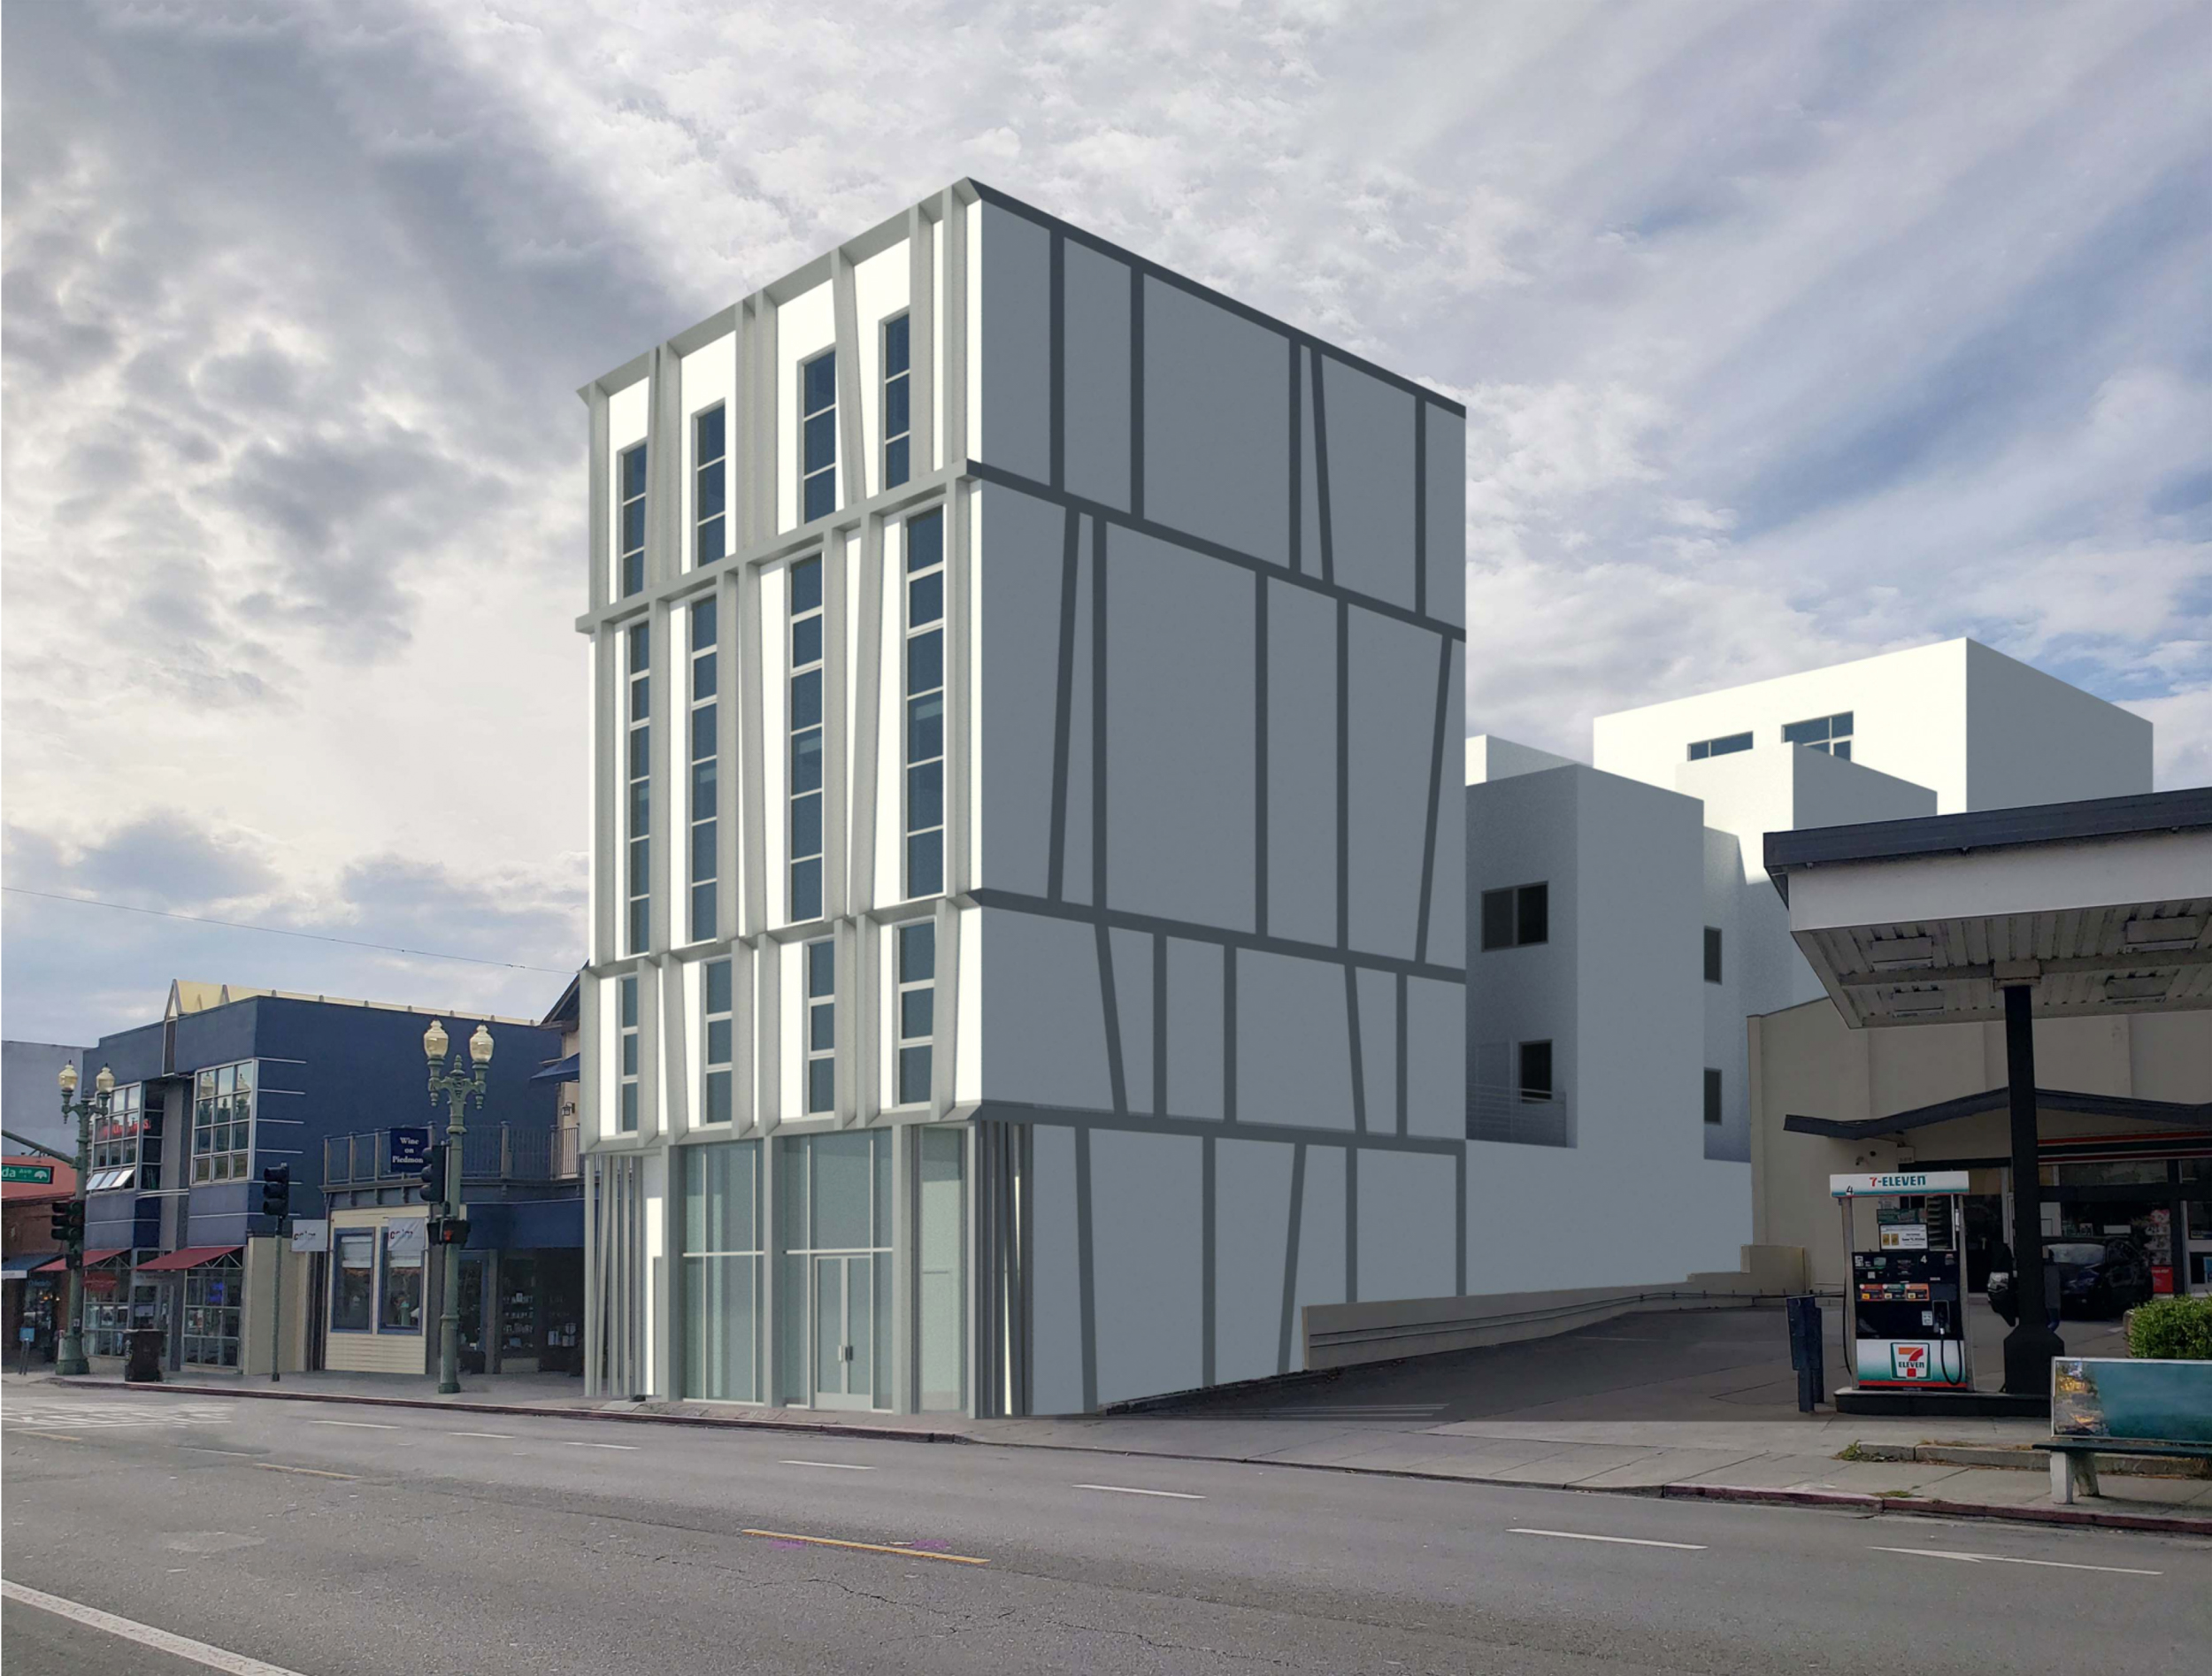 4185 Piedmont Avenue, rendering by Kava Massih Architects